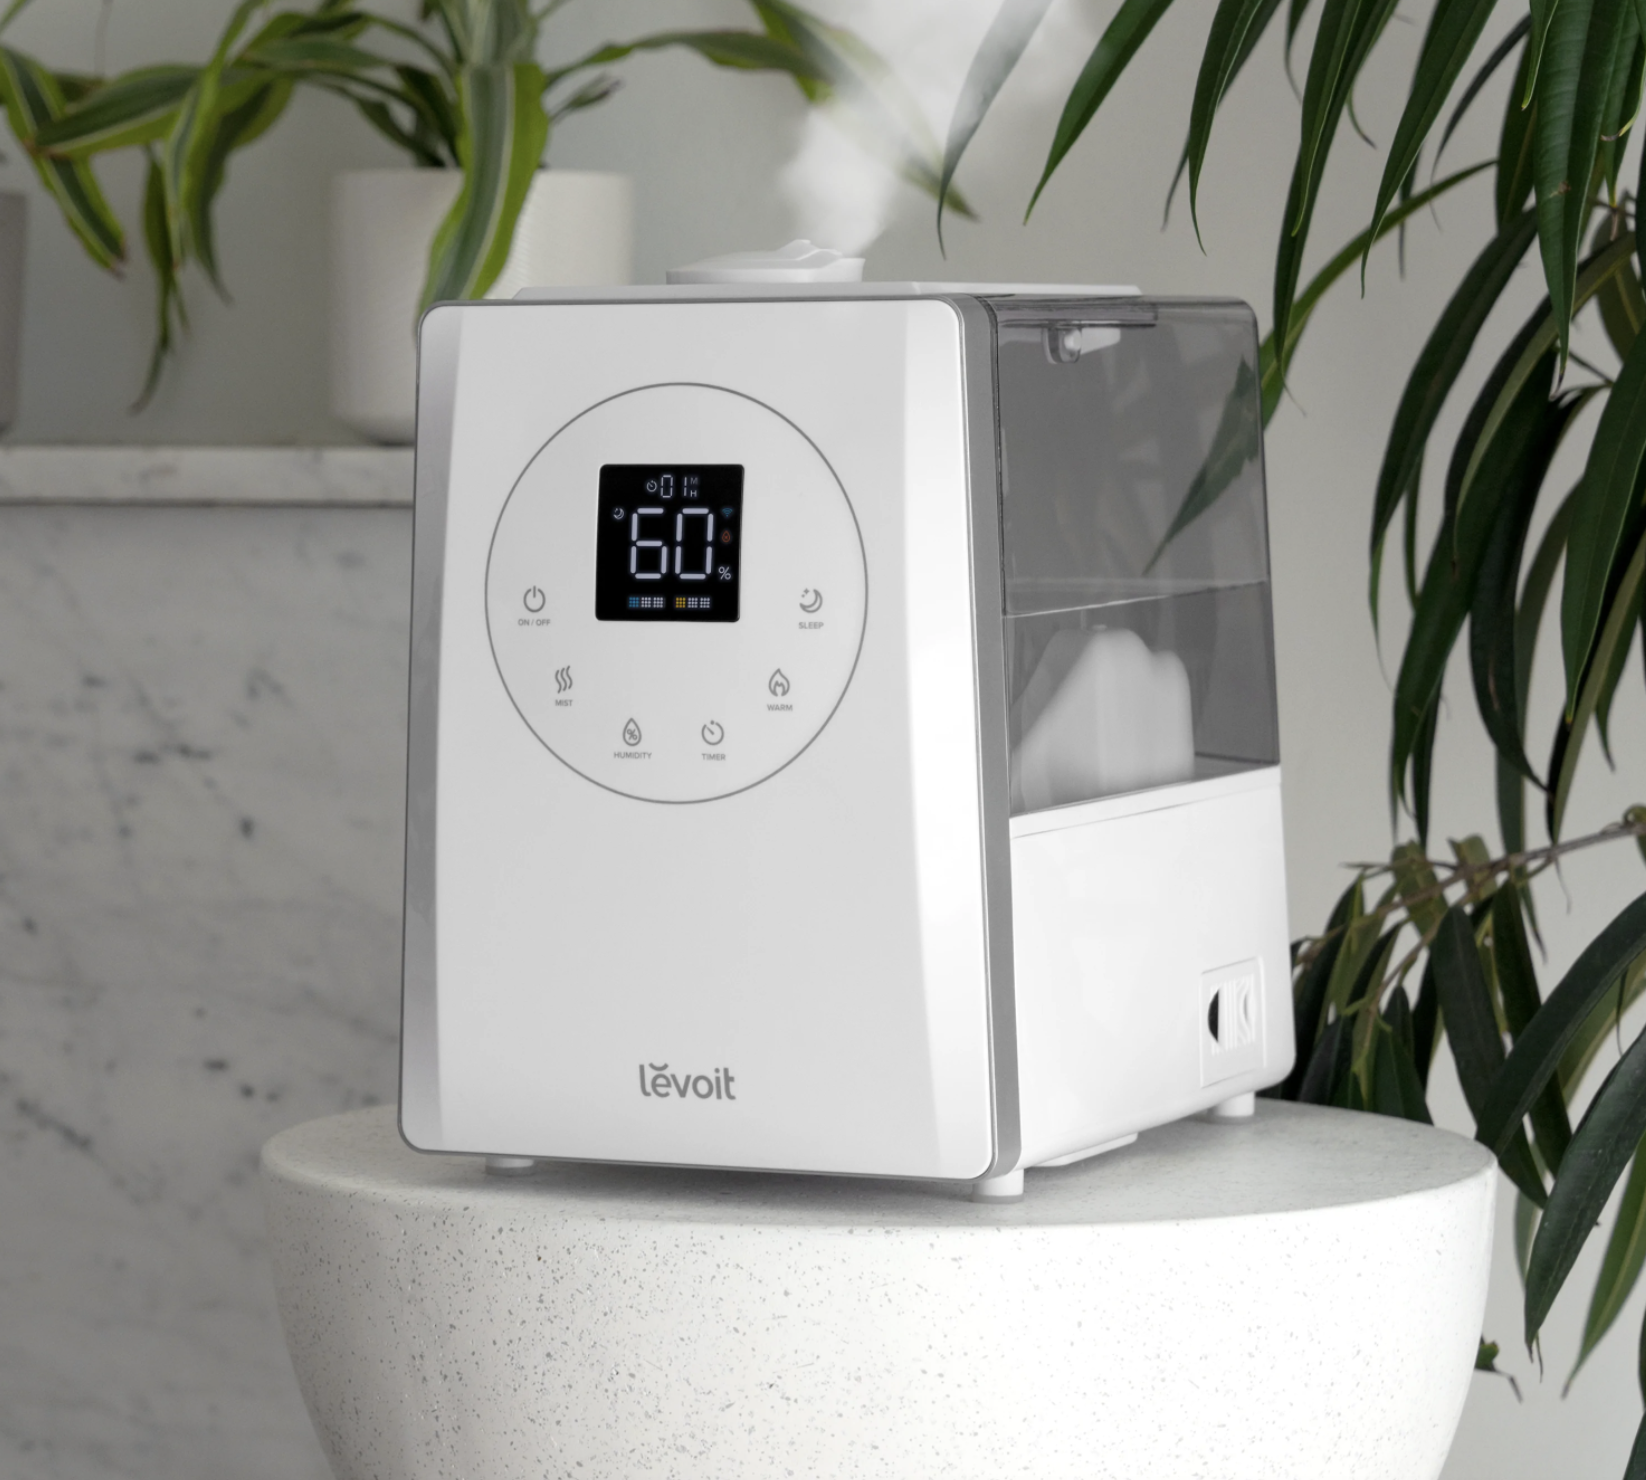 A https://levoit.com/products/lv600s-smart-hybrid-ultrasonic-humidifier